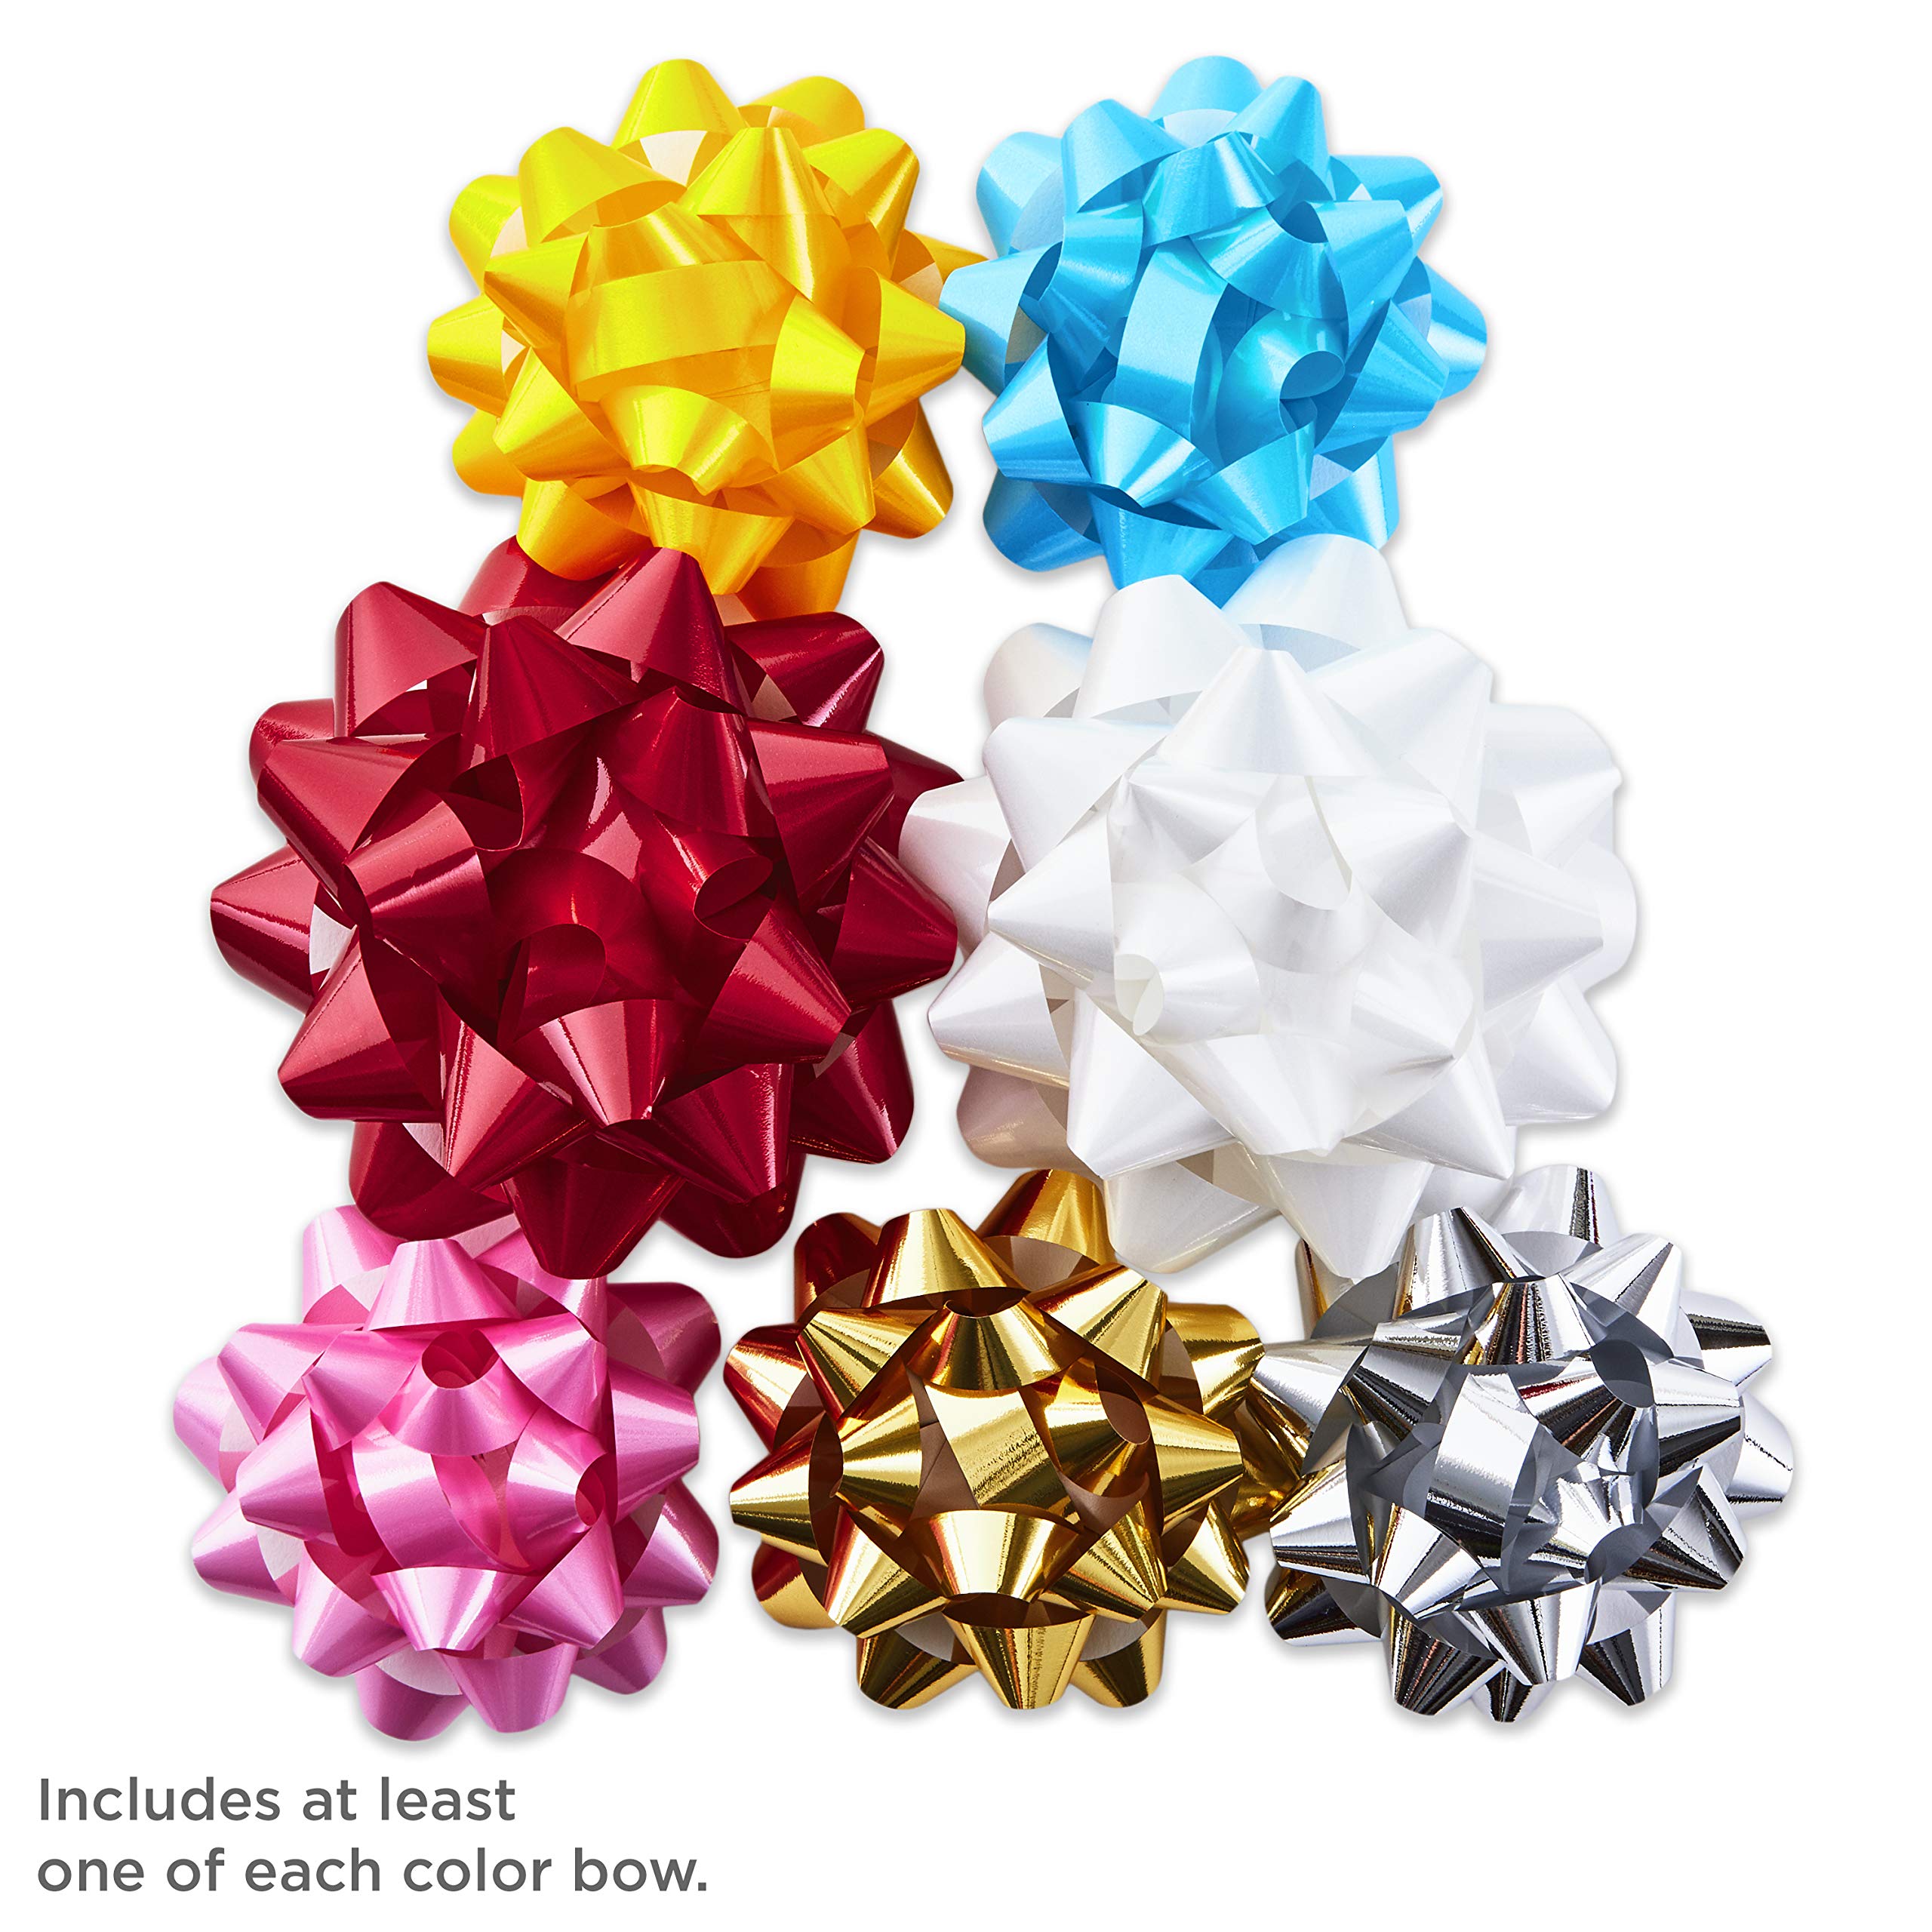 Hallmark Gift Bow Assortment (30, 2 Sizes) Red, White, Pink, Blue, Yellow, Silver, Gold for Christmas, Hanukkah, Birthdays, Weddings, Baby Showers